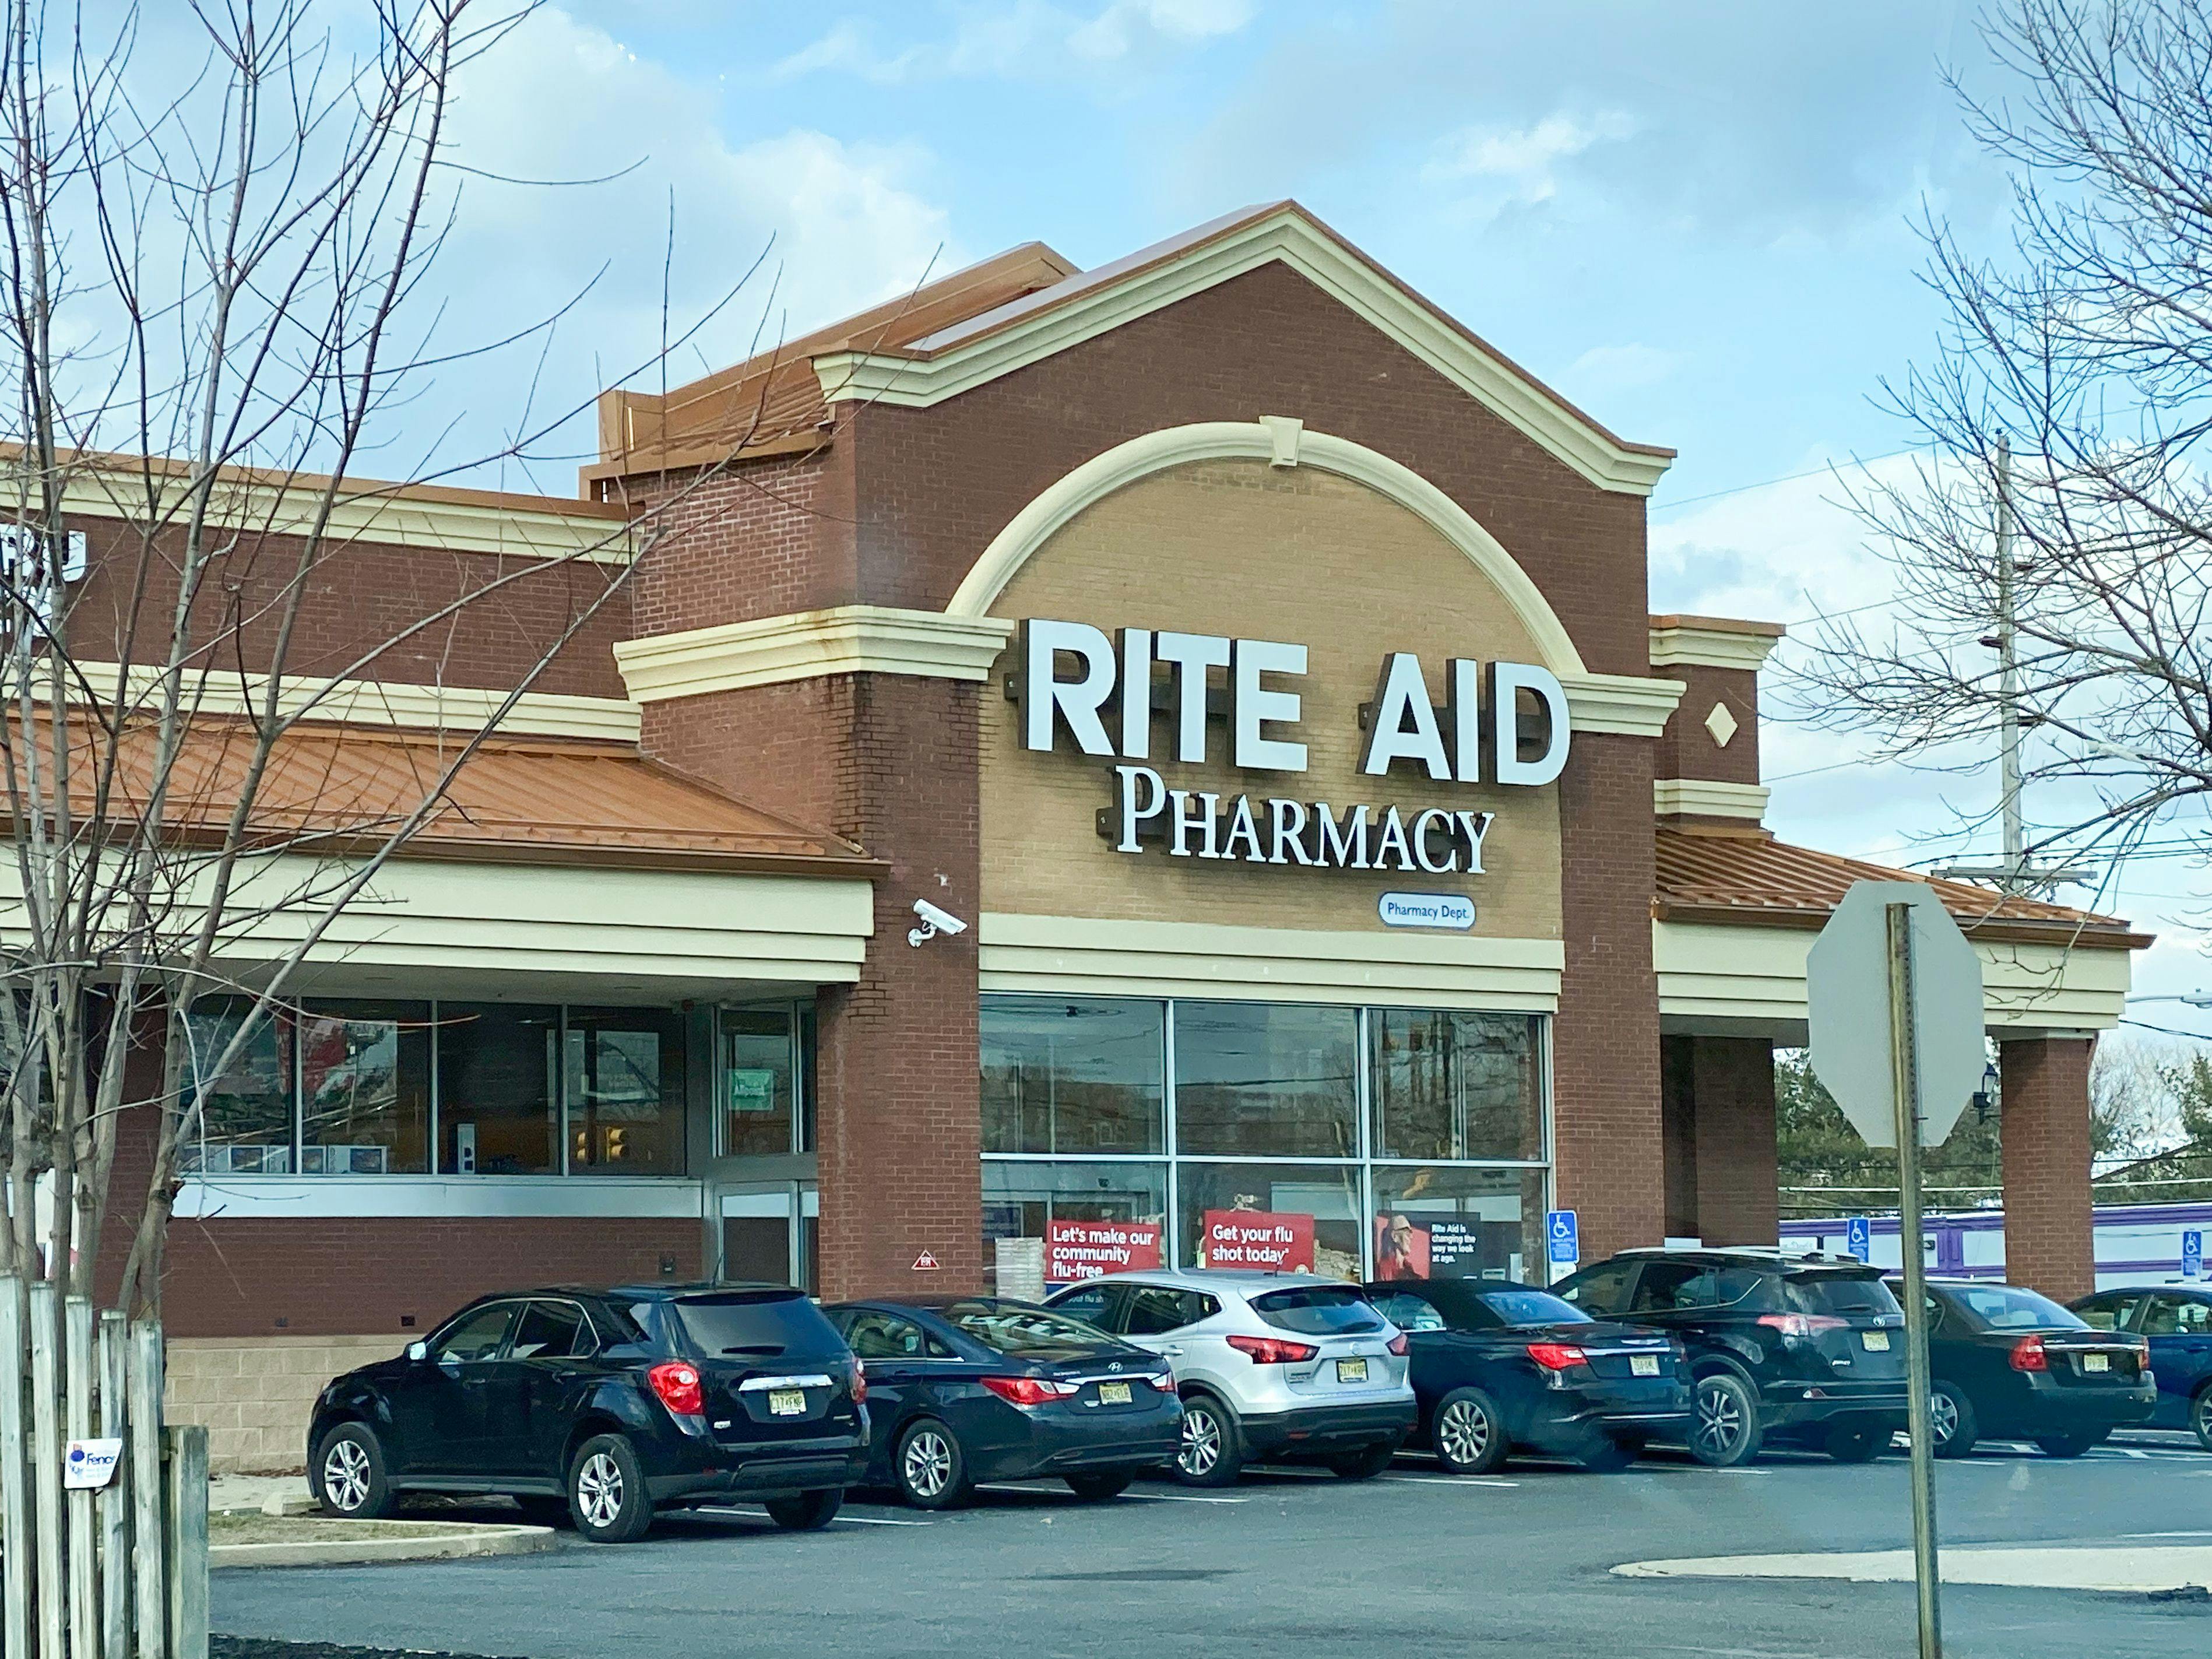 Rite Aid, startup Homeward announce plan for primary care clinics at rural pharmacies